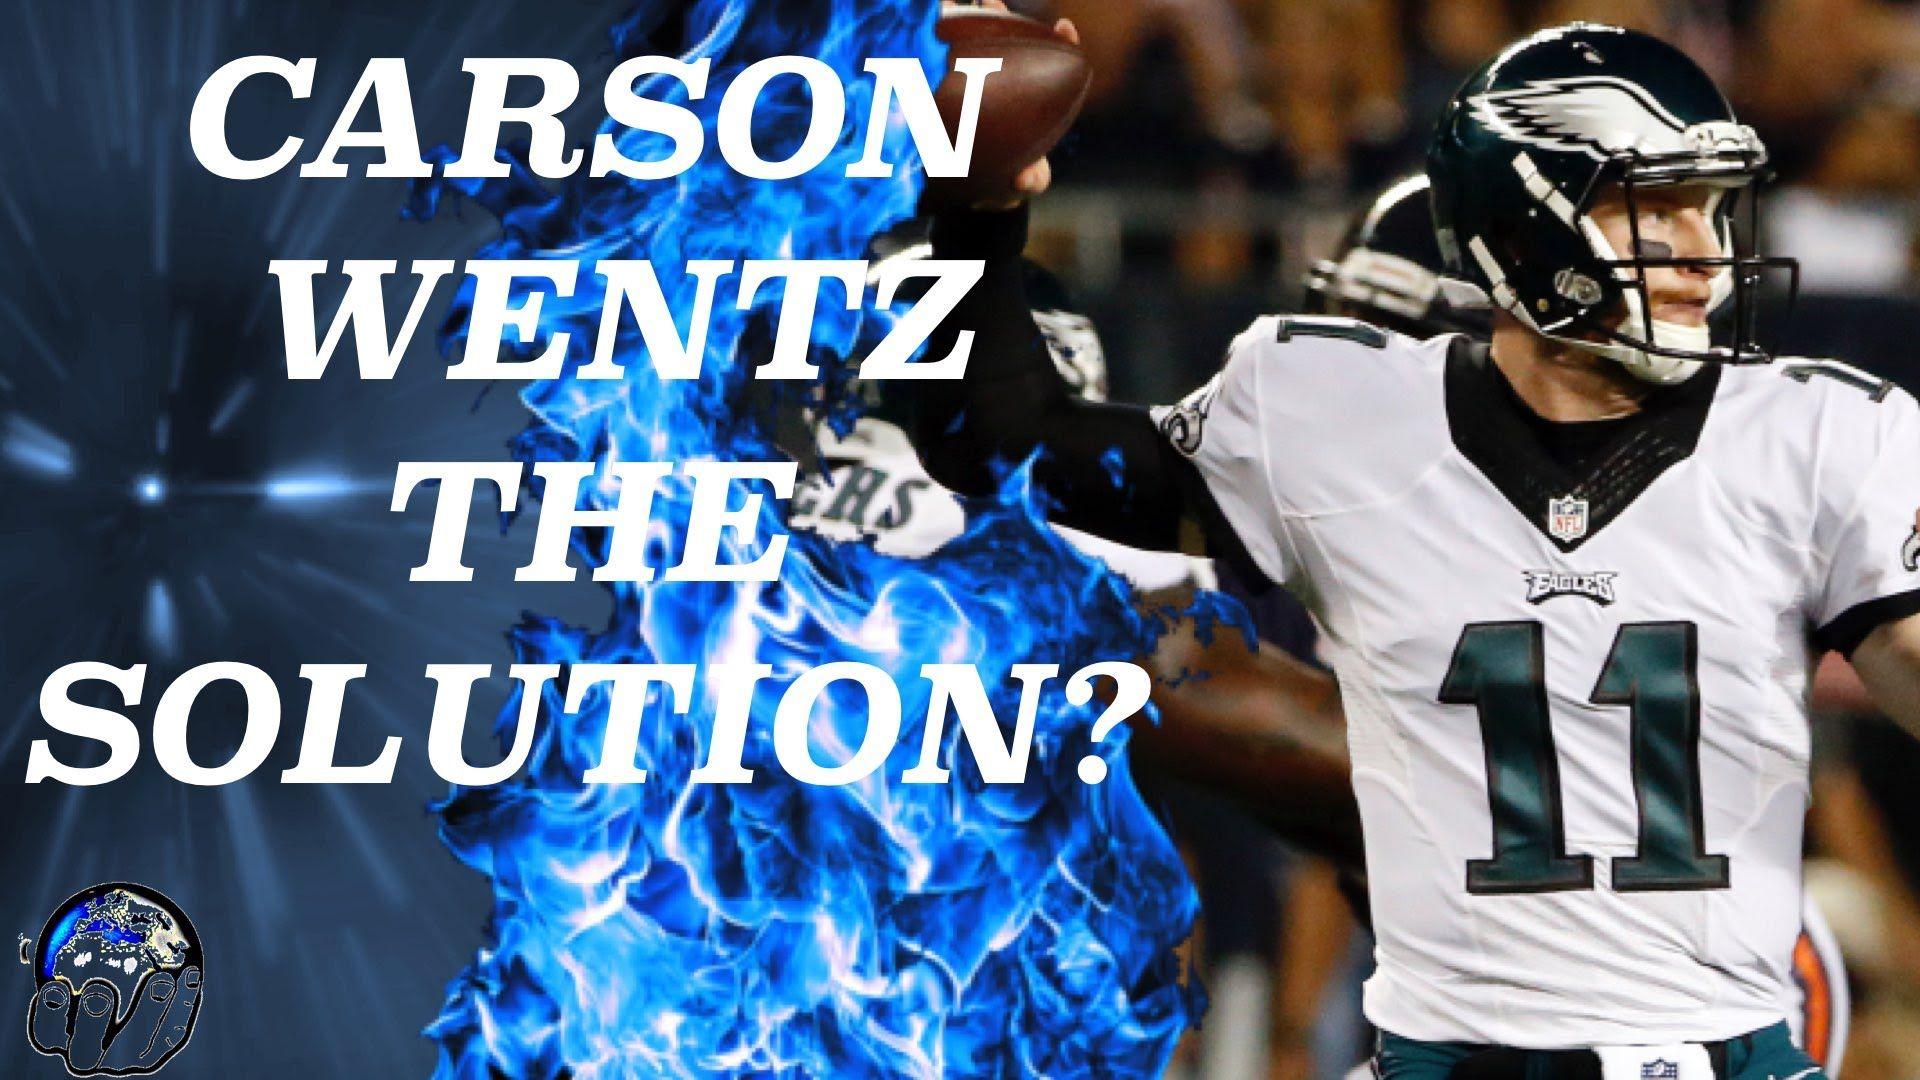 Carson Wentz May Be The Answer For The Eagles. NFL MNF 2016 Week